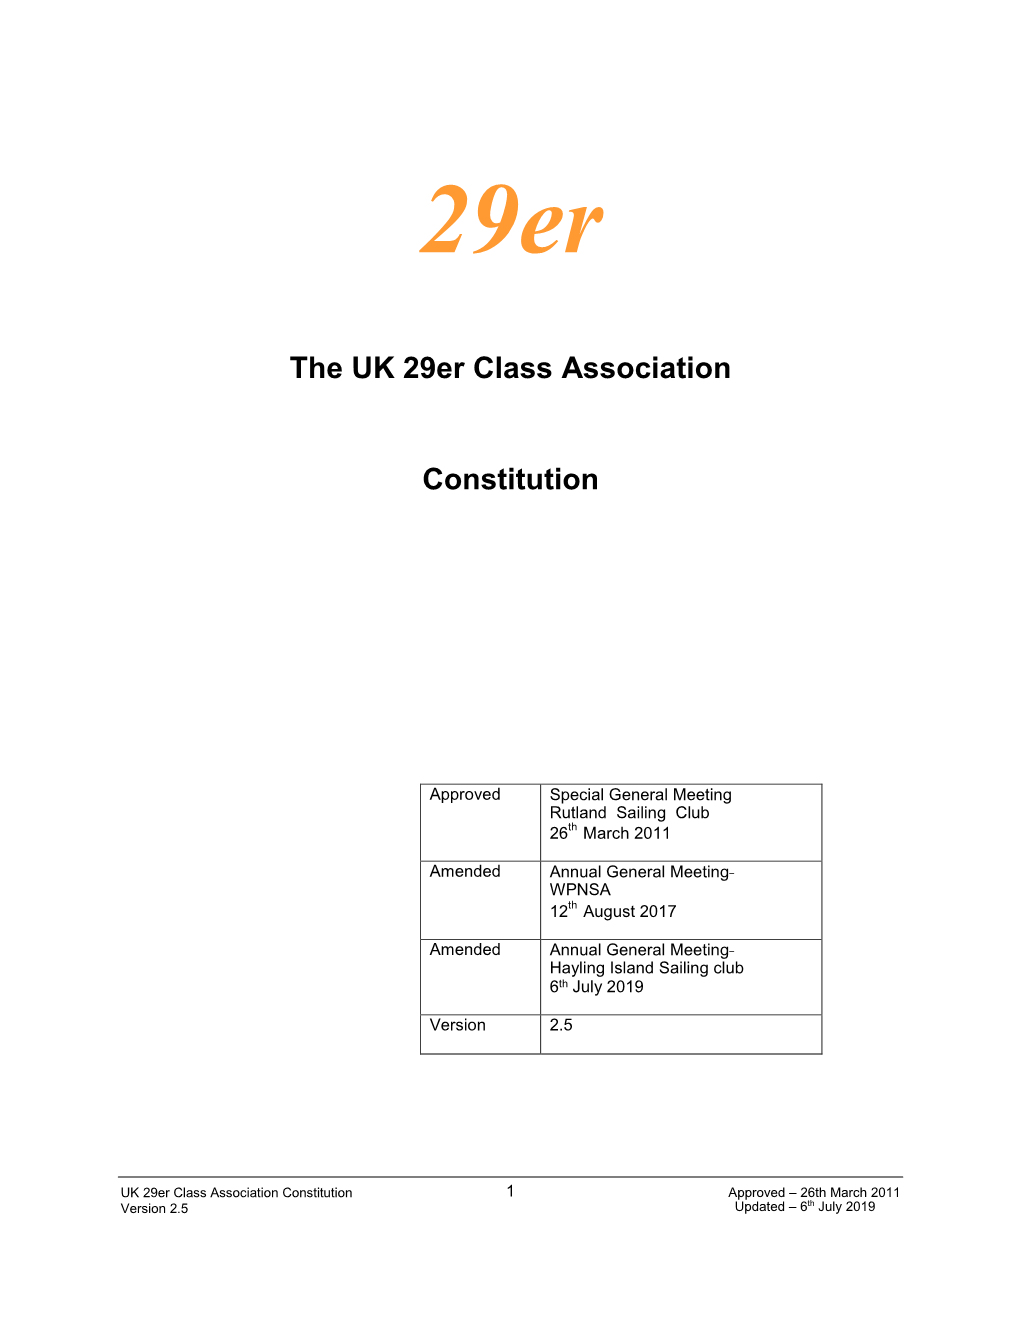 To Download a Copy of the UK 29Er Class Association Constitution